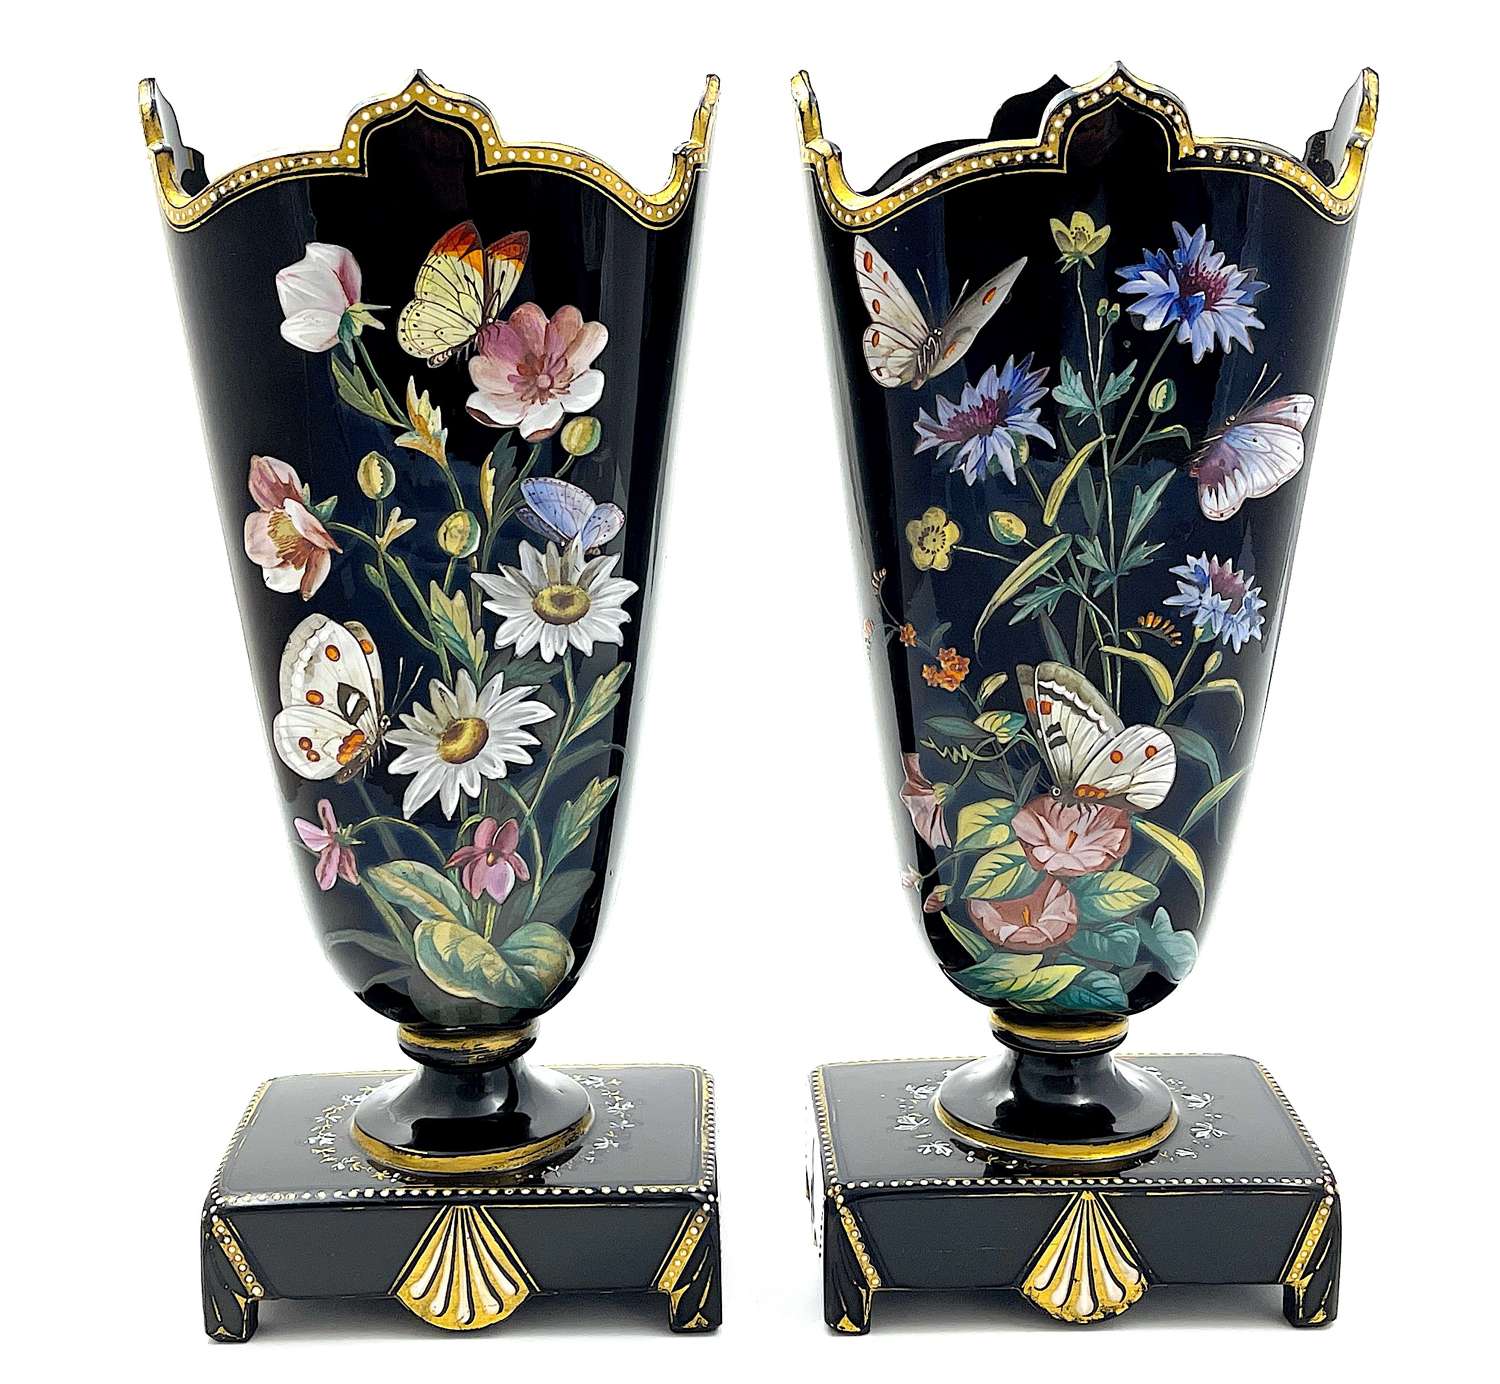 A Pair of Antique Moser Black Opaline Glass Vases with Butterflies